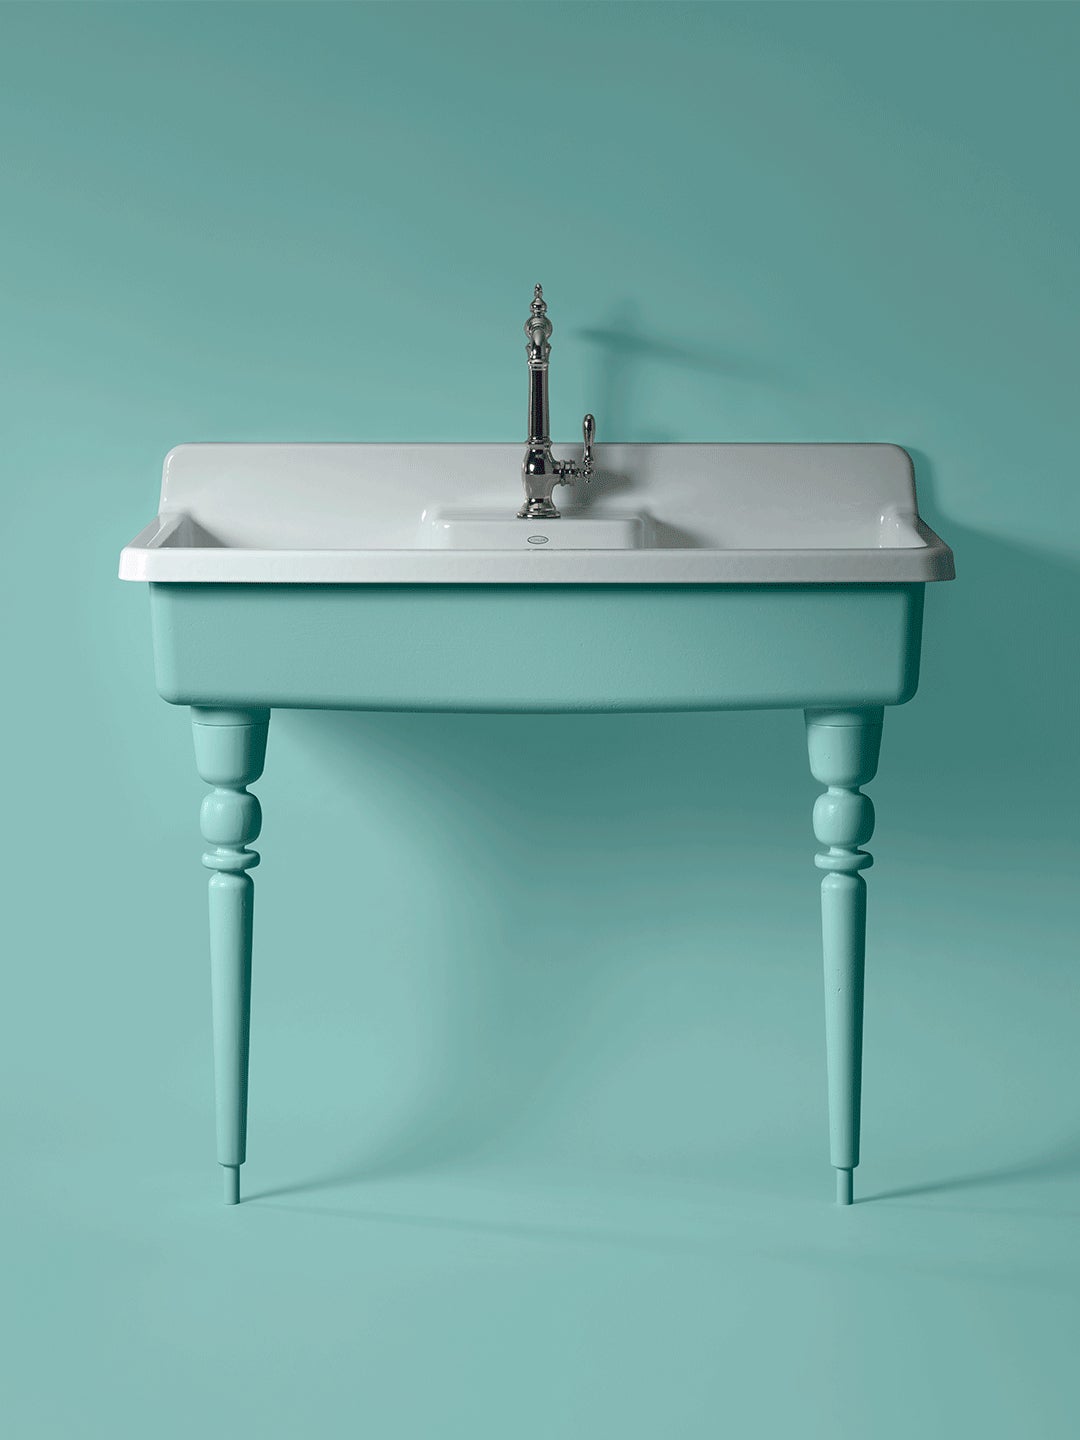 Kohler Is Bringing Back 2 Archived Colors—And You Can Pick Which Ones